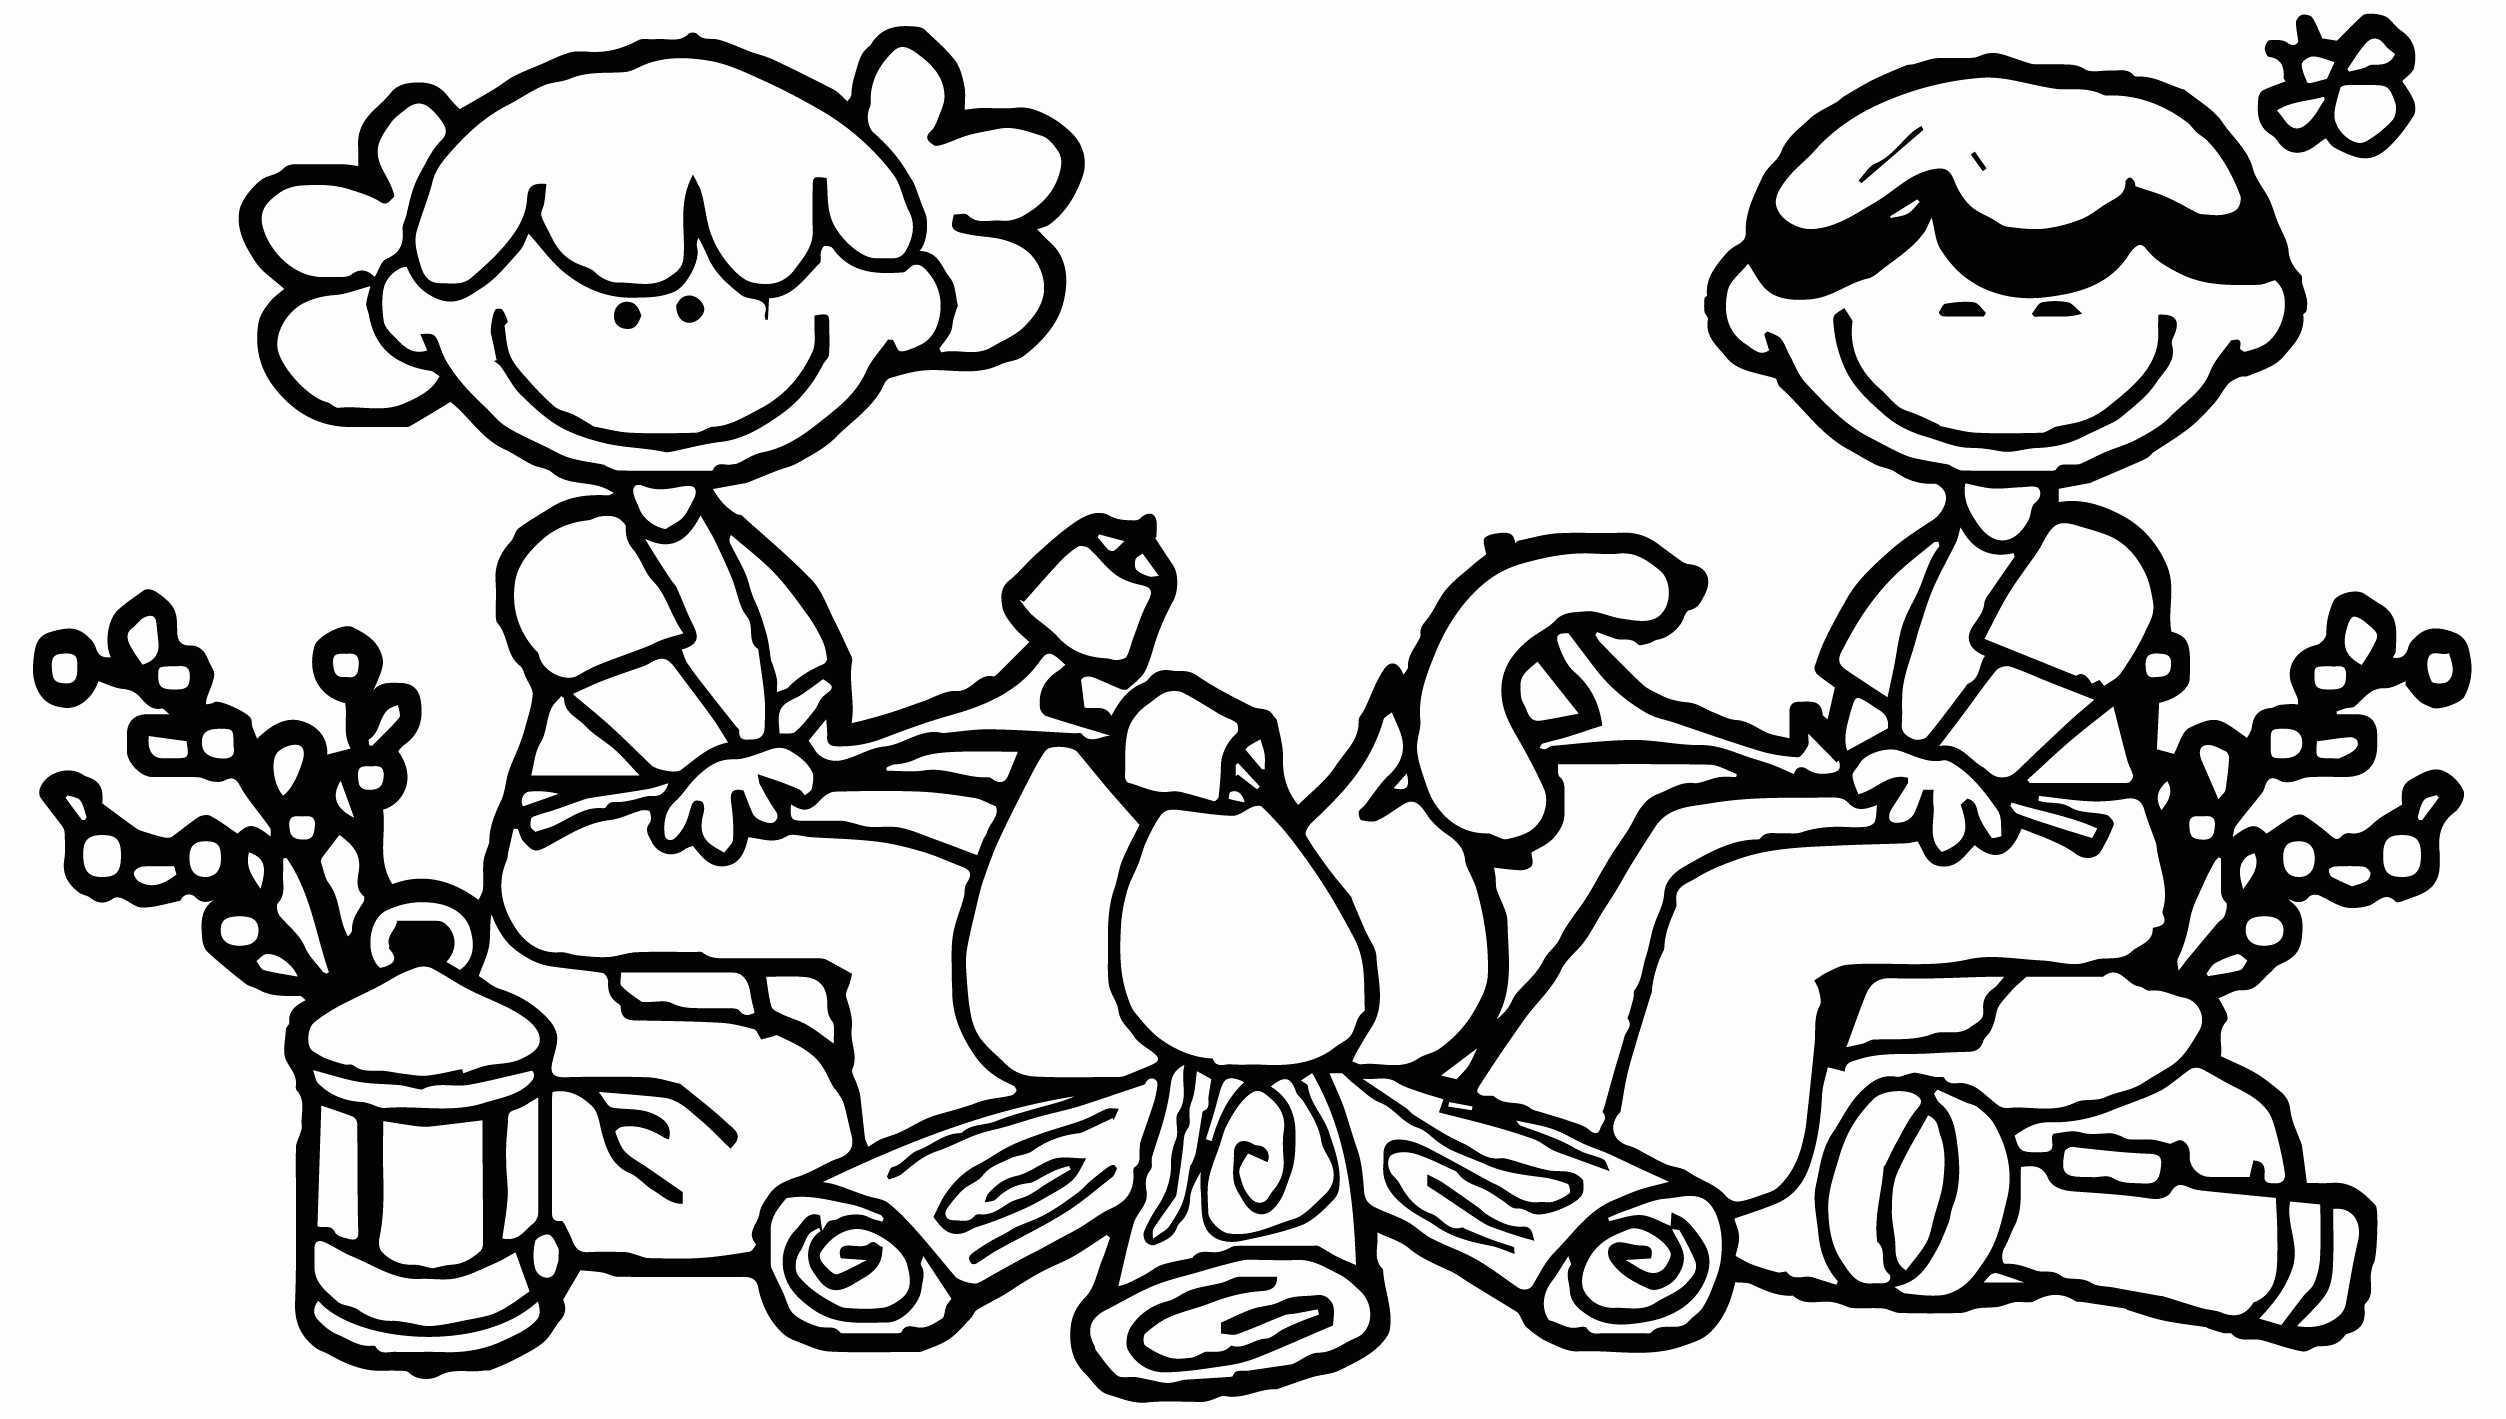 Ck7_campfire Coloring Page | Wecoloringpage